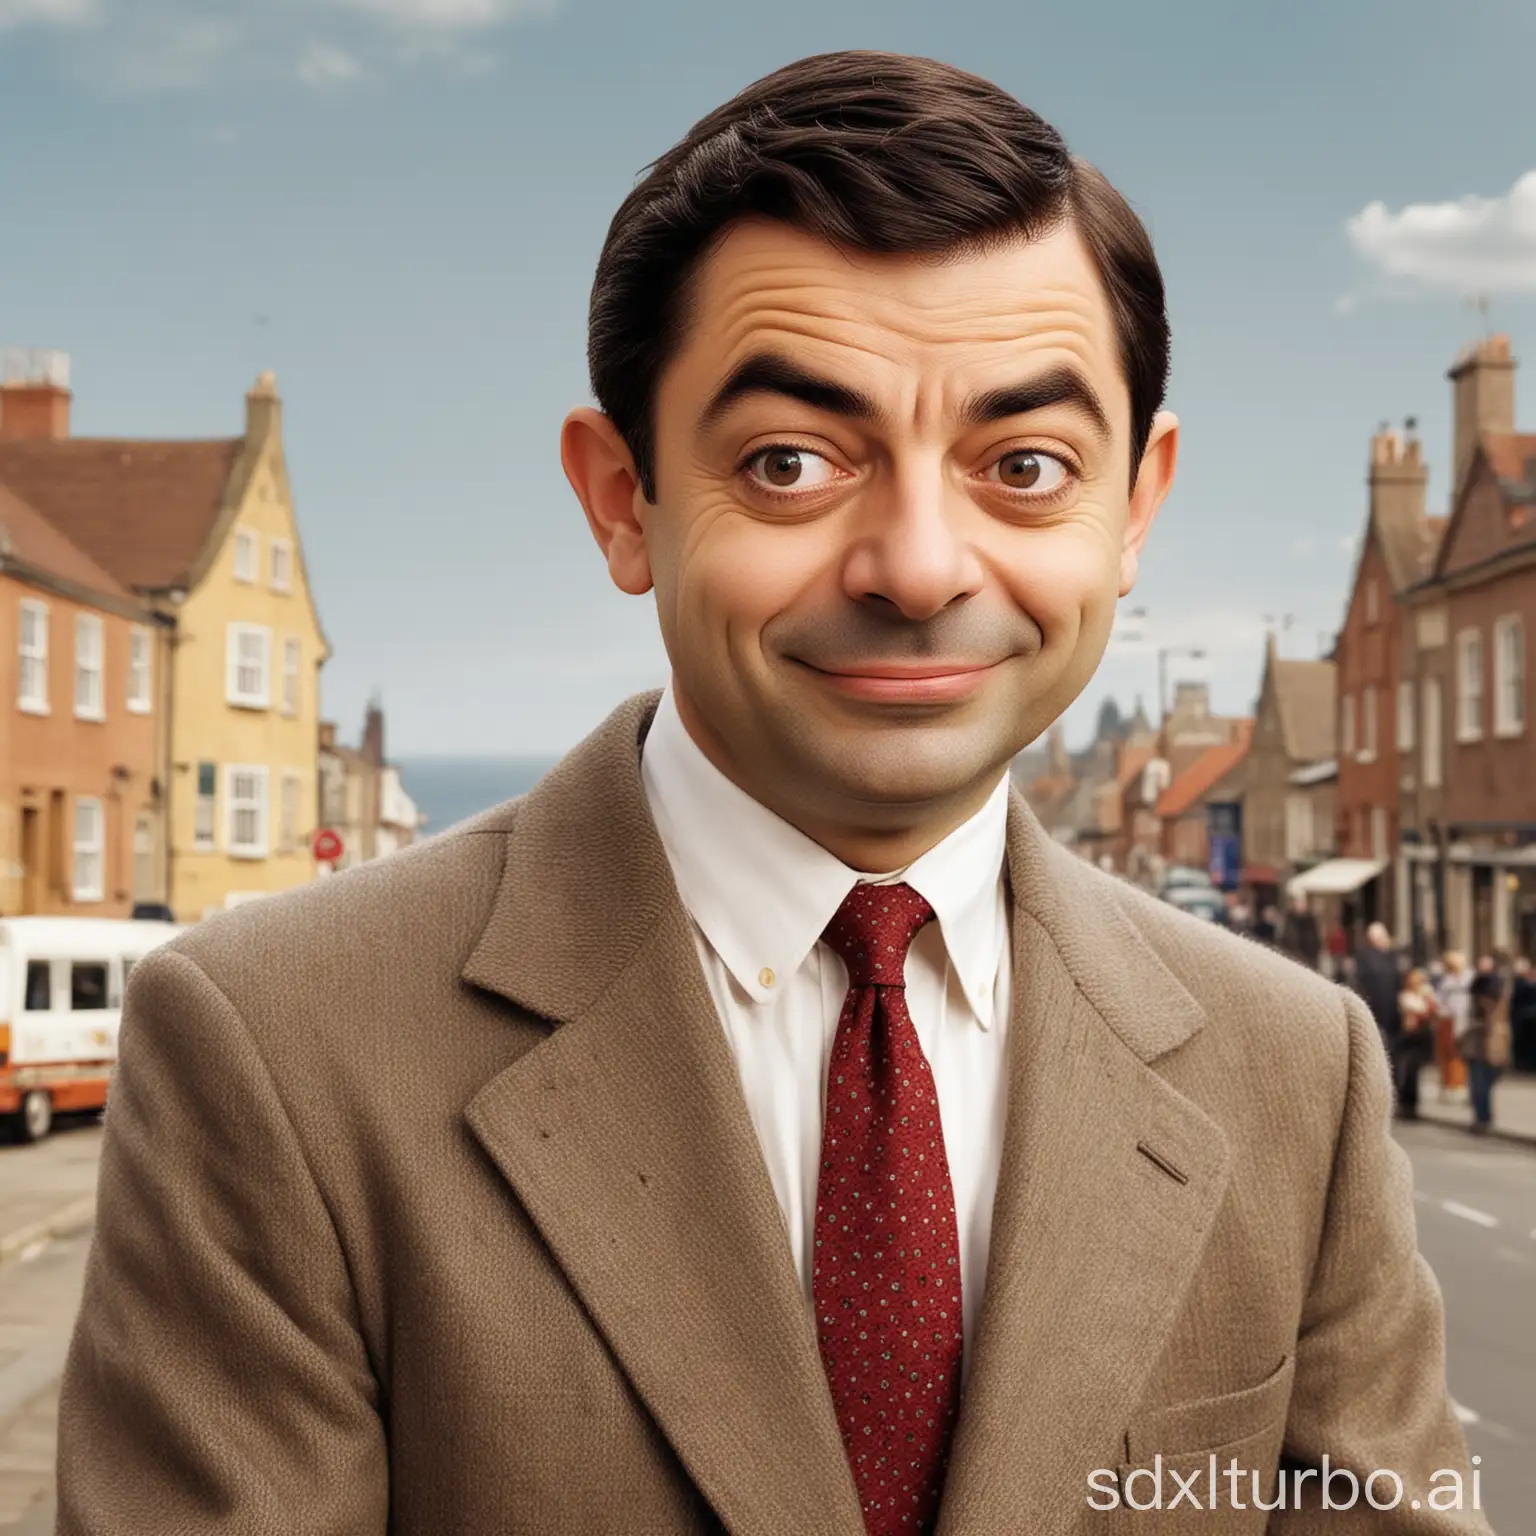 Draw a Mr. Bean, humorously and amusingly, makes people laugh at first sight, with a sense of depth in the background.